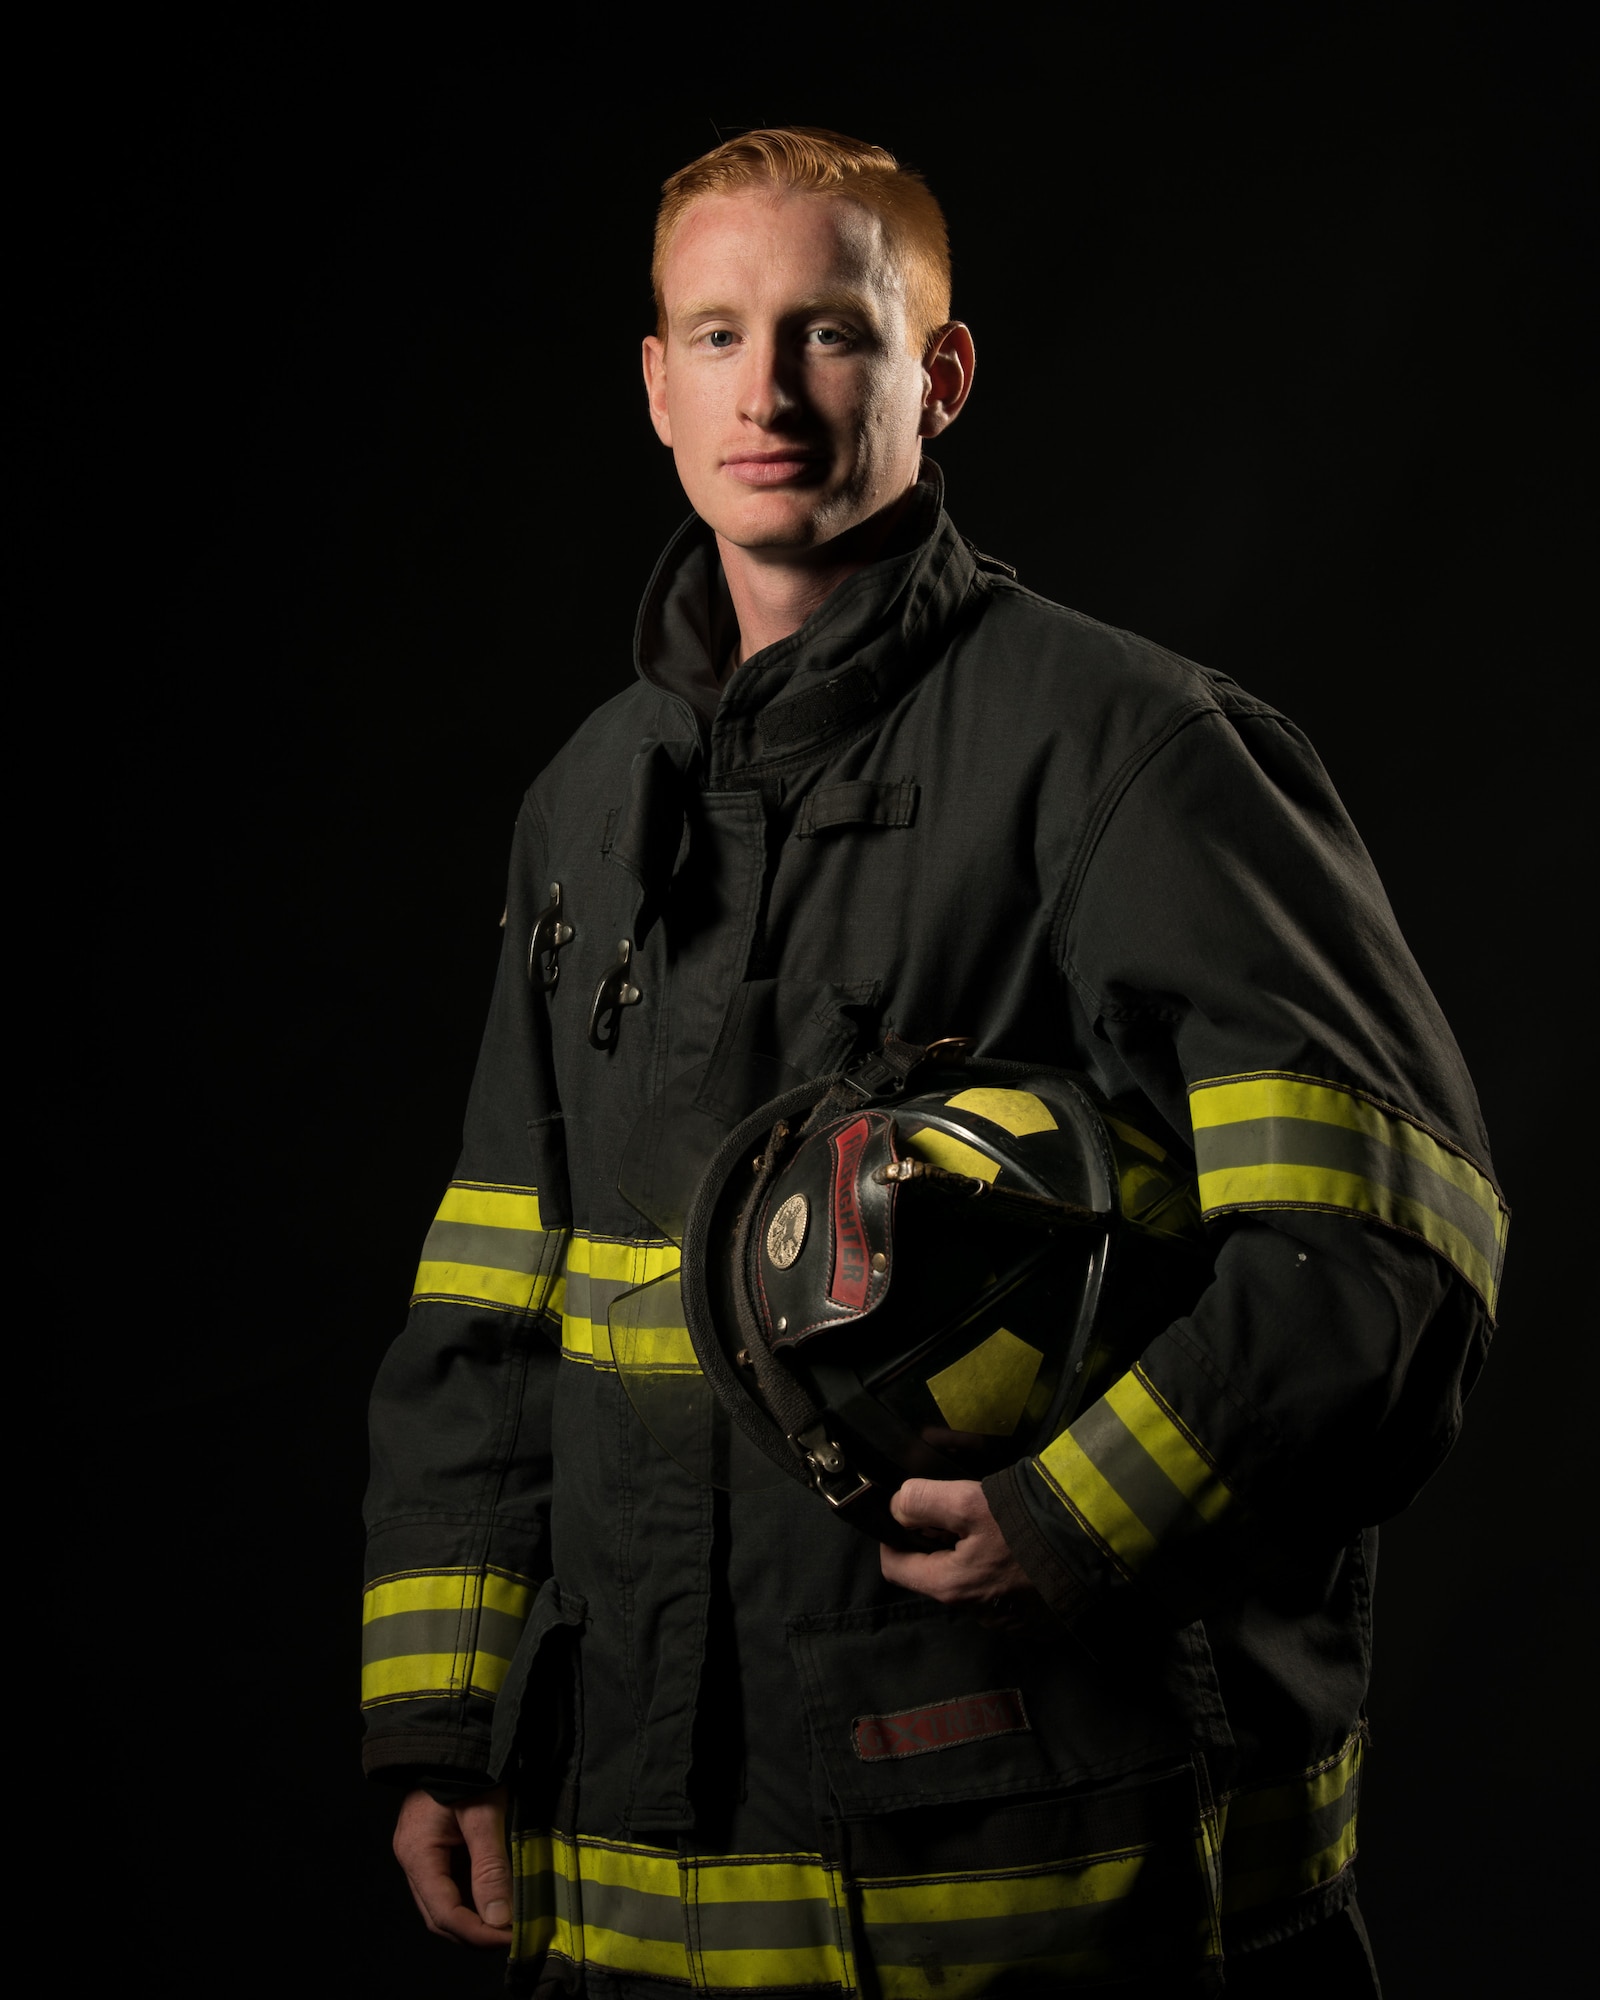 Senior Airman Patrick Erwin, 436th Civil Engineer Squadron driver operator, poses for Fire Prevention Week Oct. 1, 2019, at Dover Air Force Base, Del. During Fire Prevention Week, the Dover AFB Fire Department hosts various activities in order to raise fire safety awareness for Airmen and their families. (U.S. Air Force photo by Mauricio Campino)